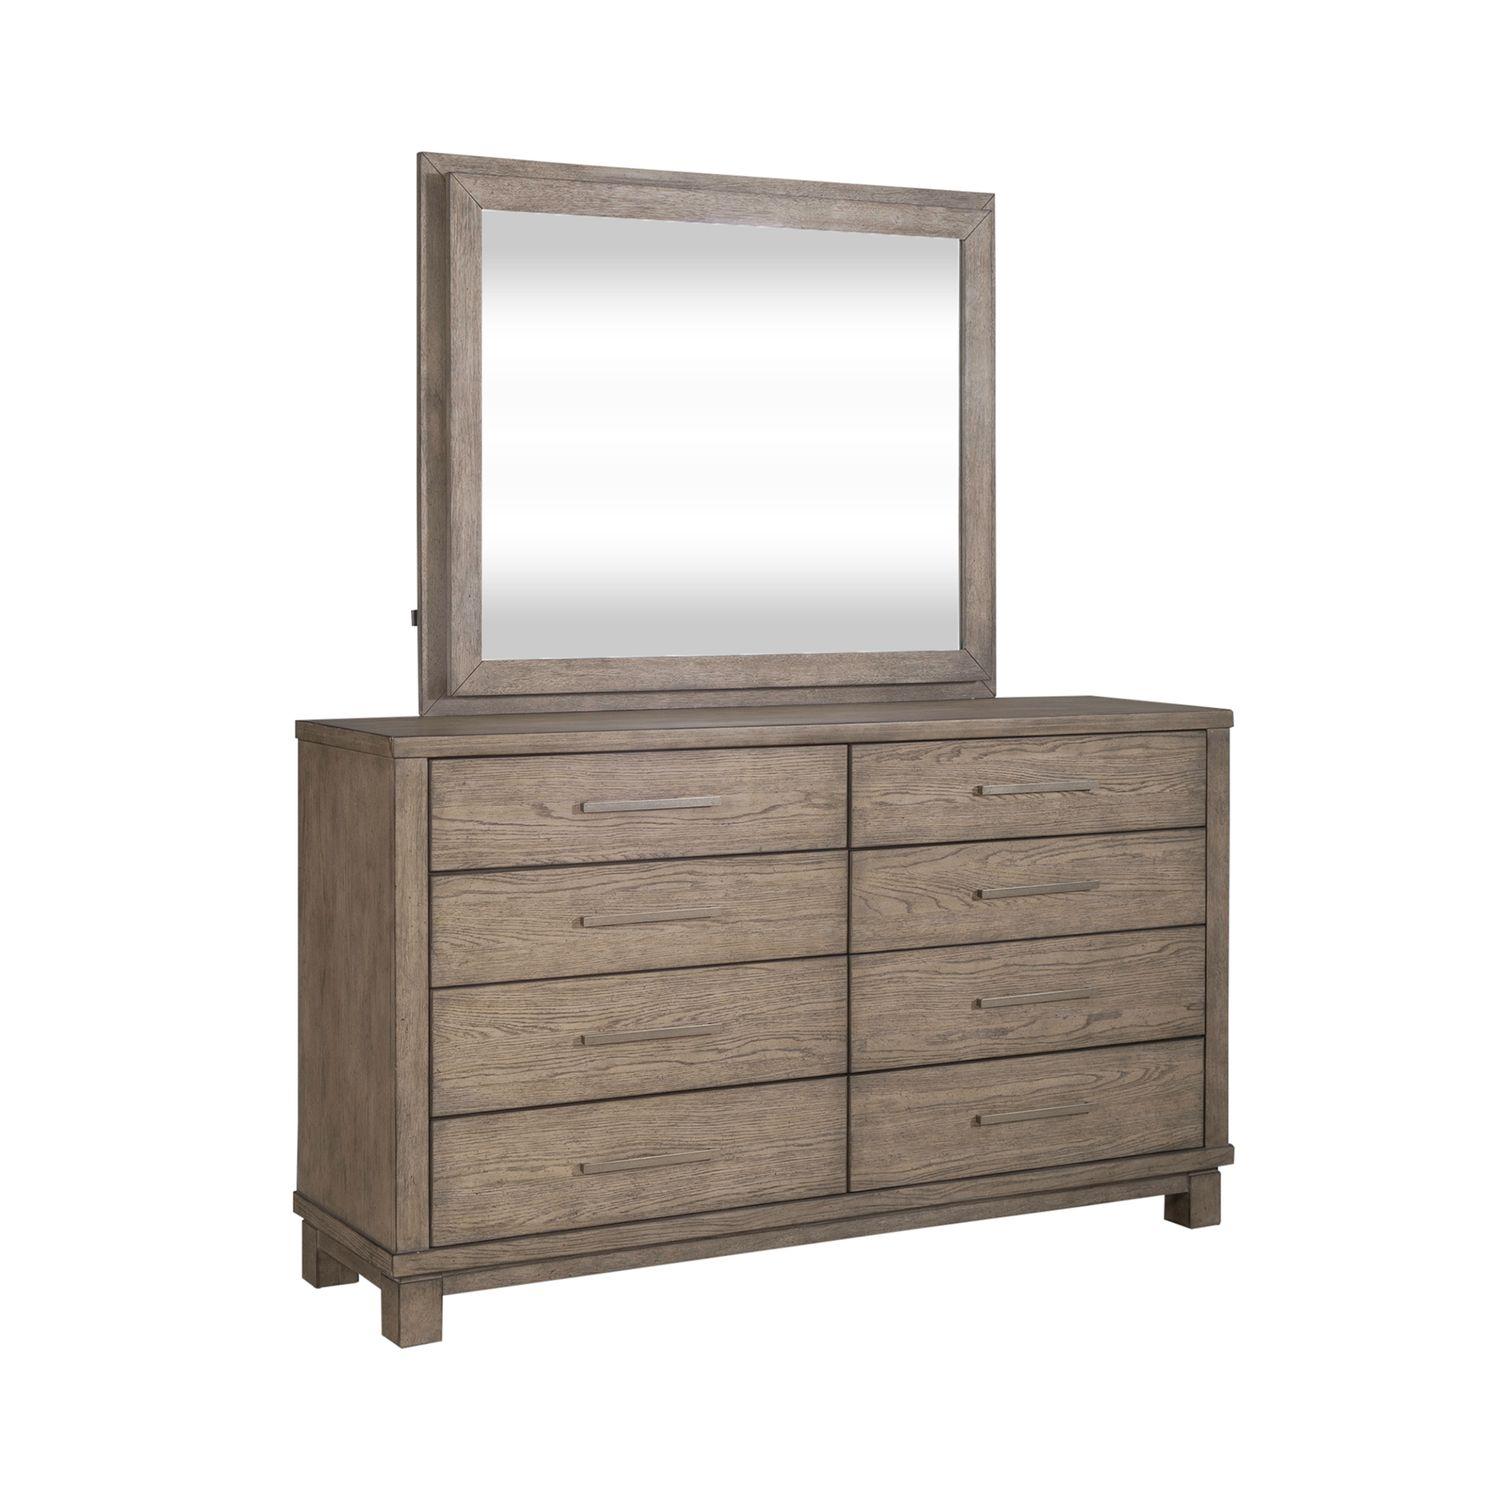 Classic Dresser With Mirror Canyon Road (876-BR) 876-BR-DM in Brown 